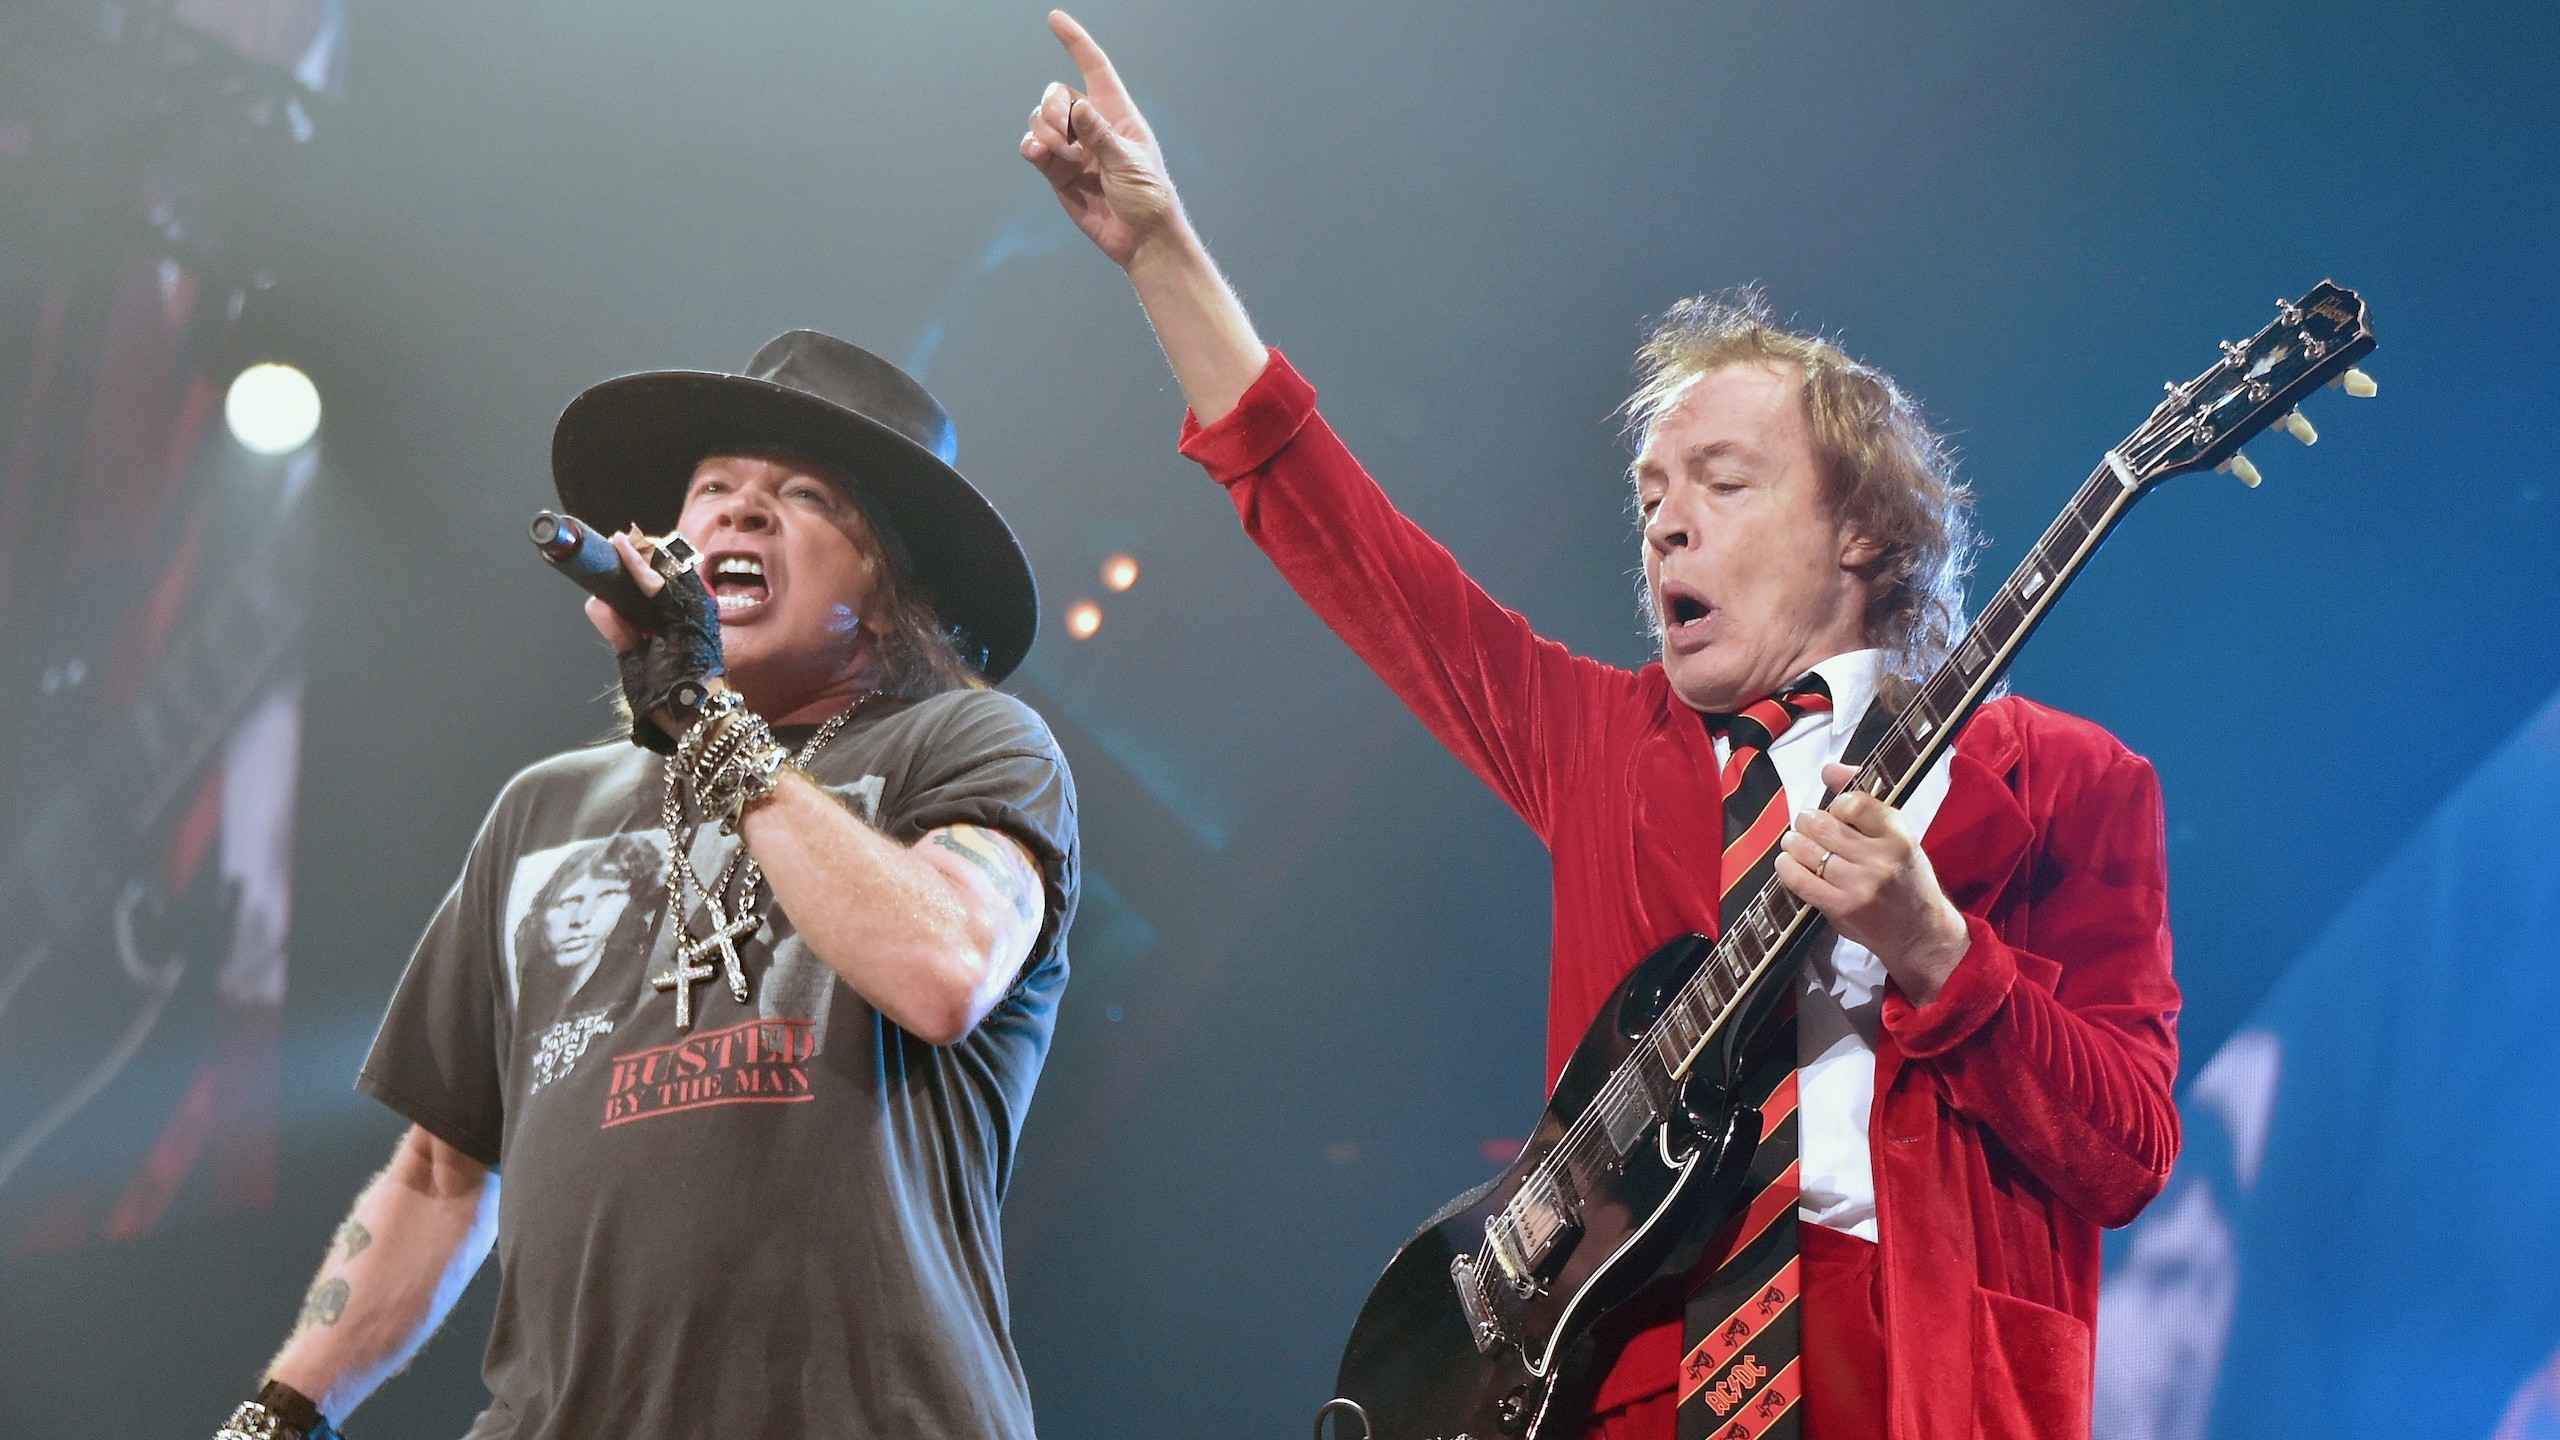 2560x1440 Reports Suggest Axl Rose Is Working On A New AC/DC Album With Angus Young -  Music Feeds